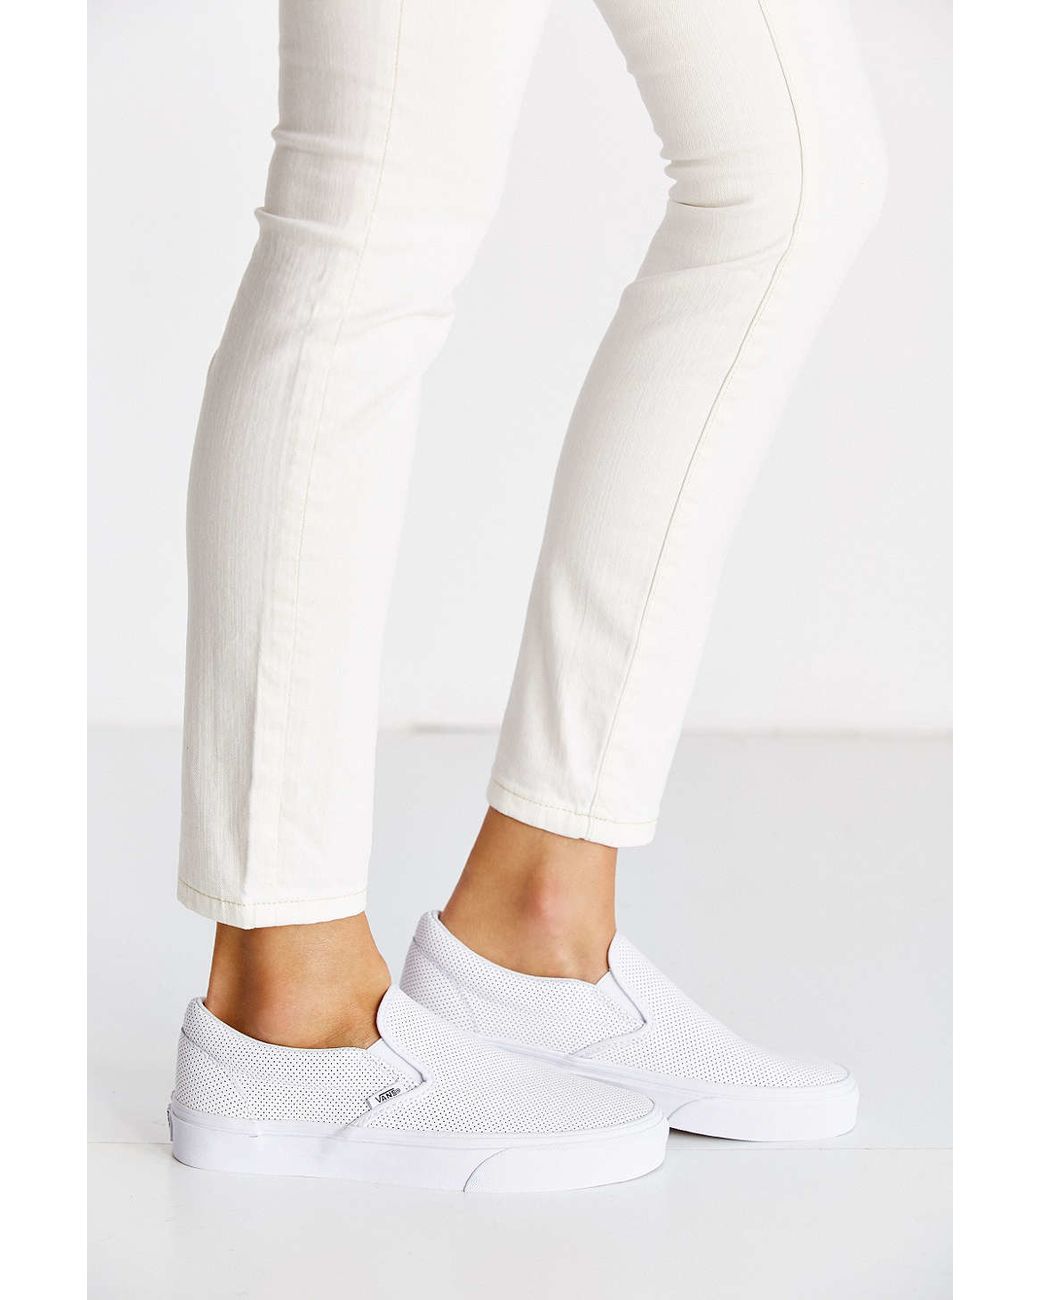 gerucht patrouille Ideaal Vans Perforated Leather Slip-on Sneaker in White | Lyst